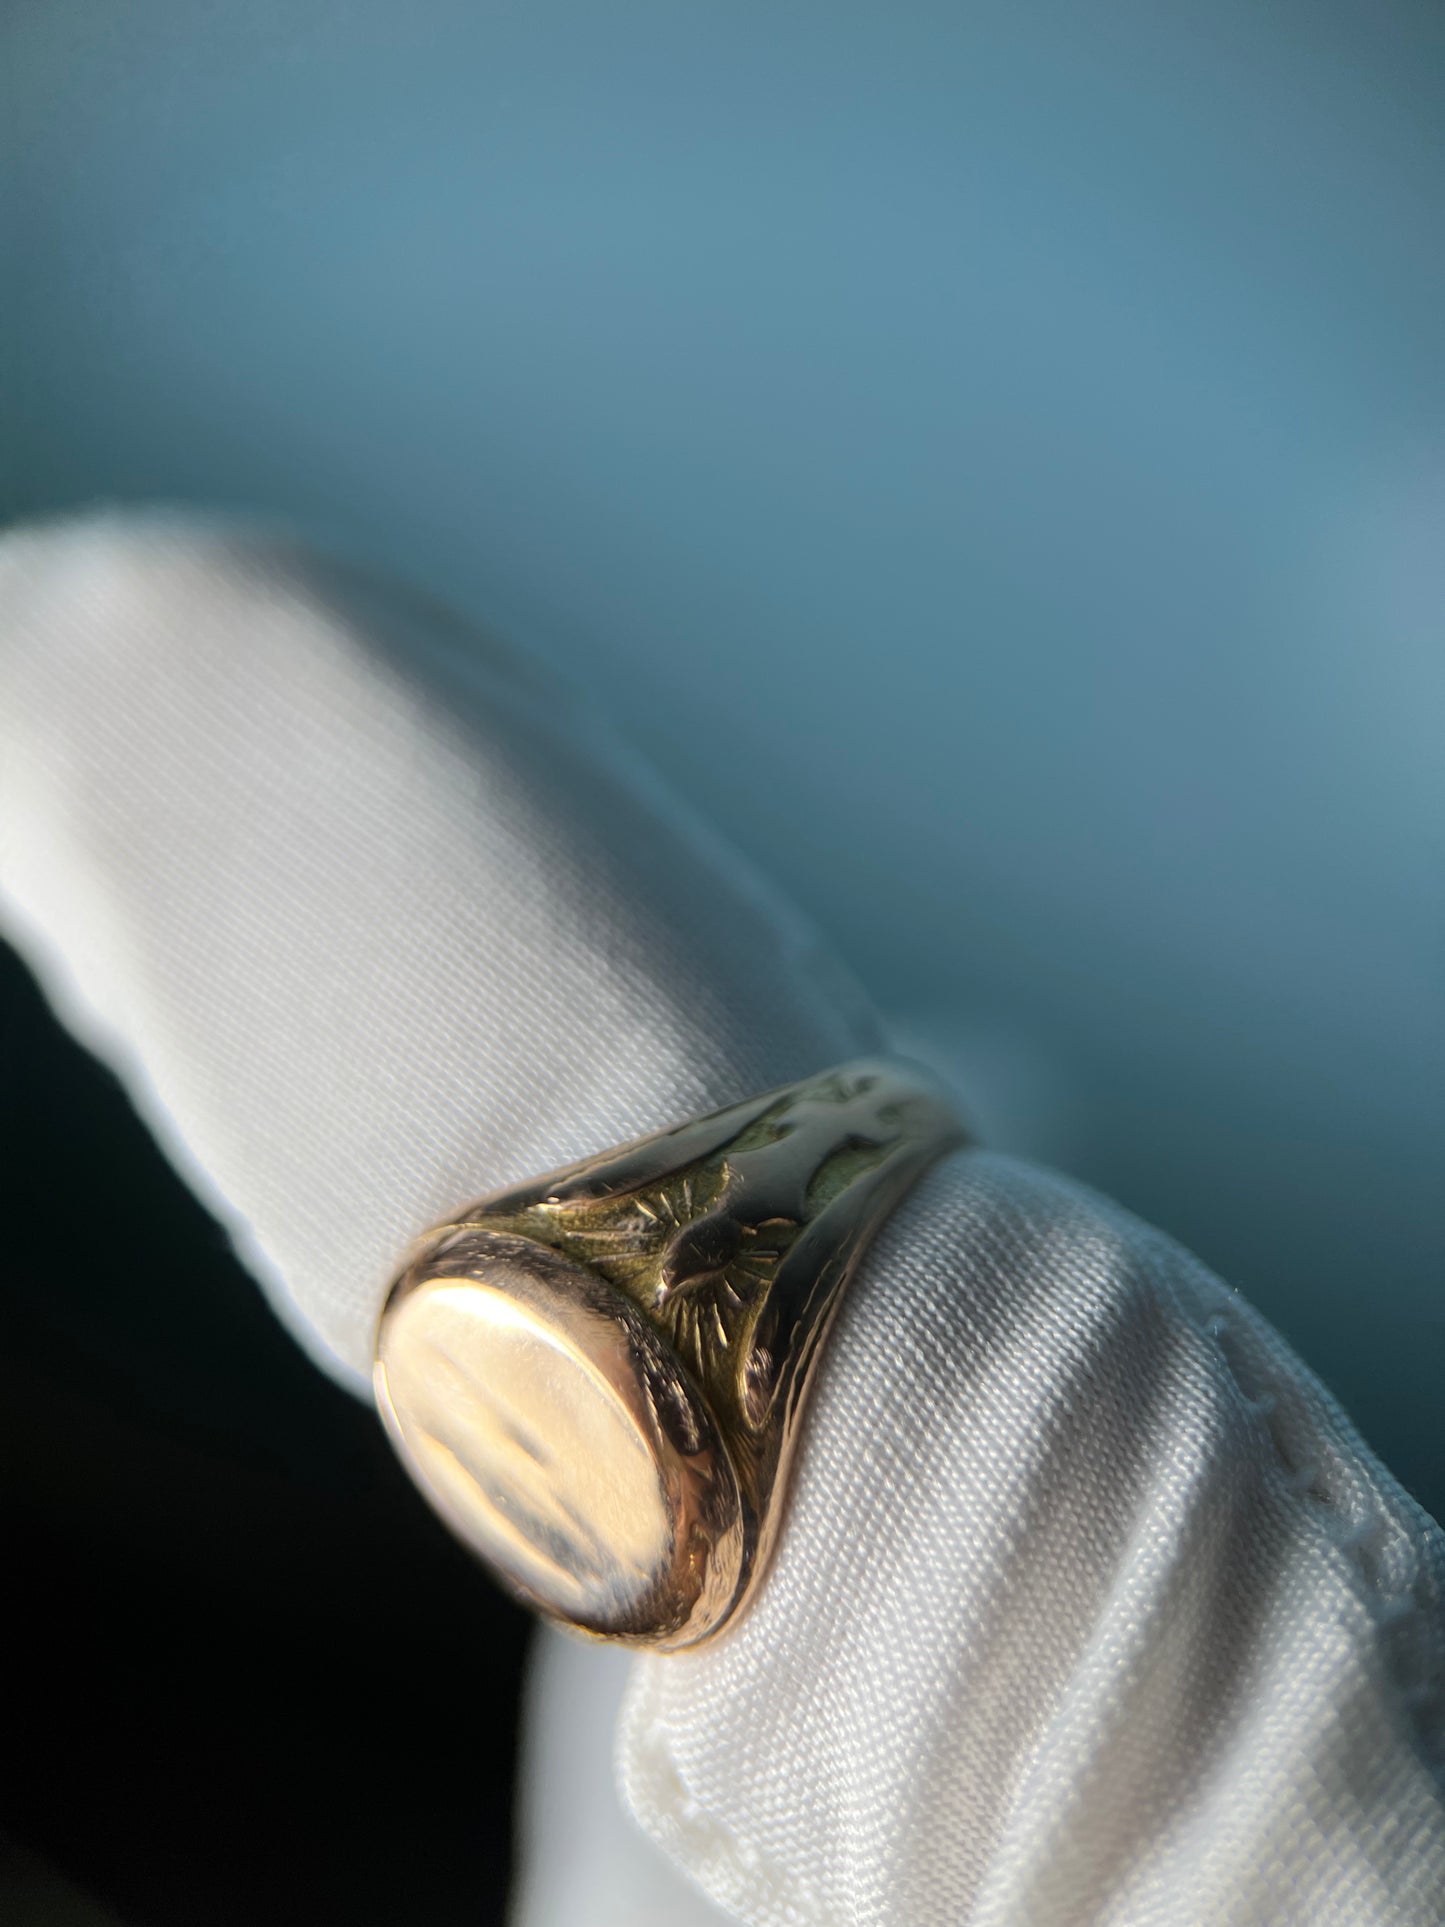 Custom Engraved Signet Ring in 10k Yellow Gold By Maxwell The Jeweler